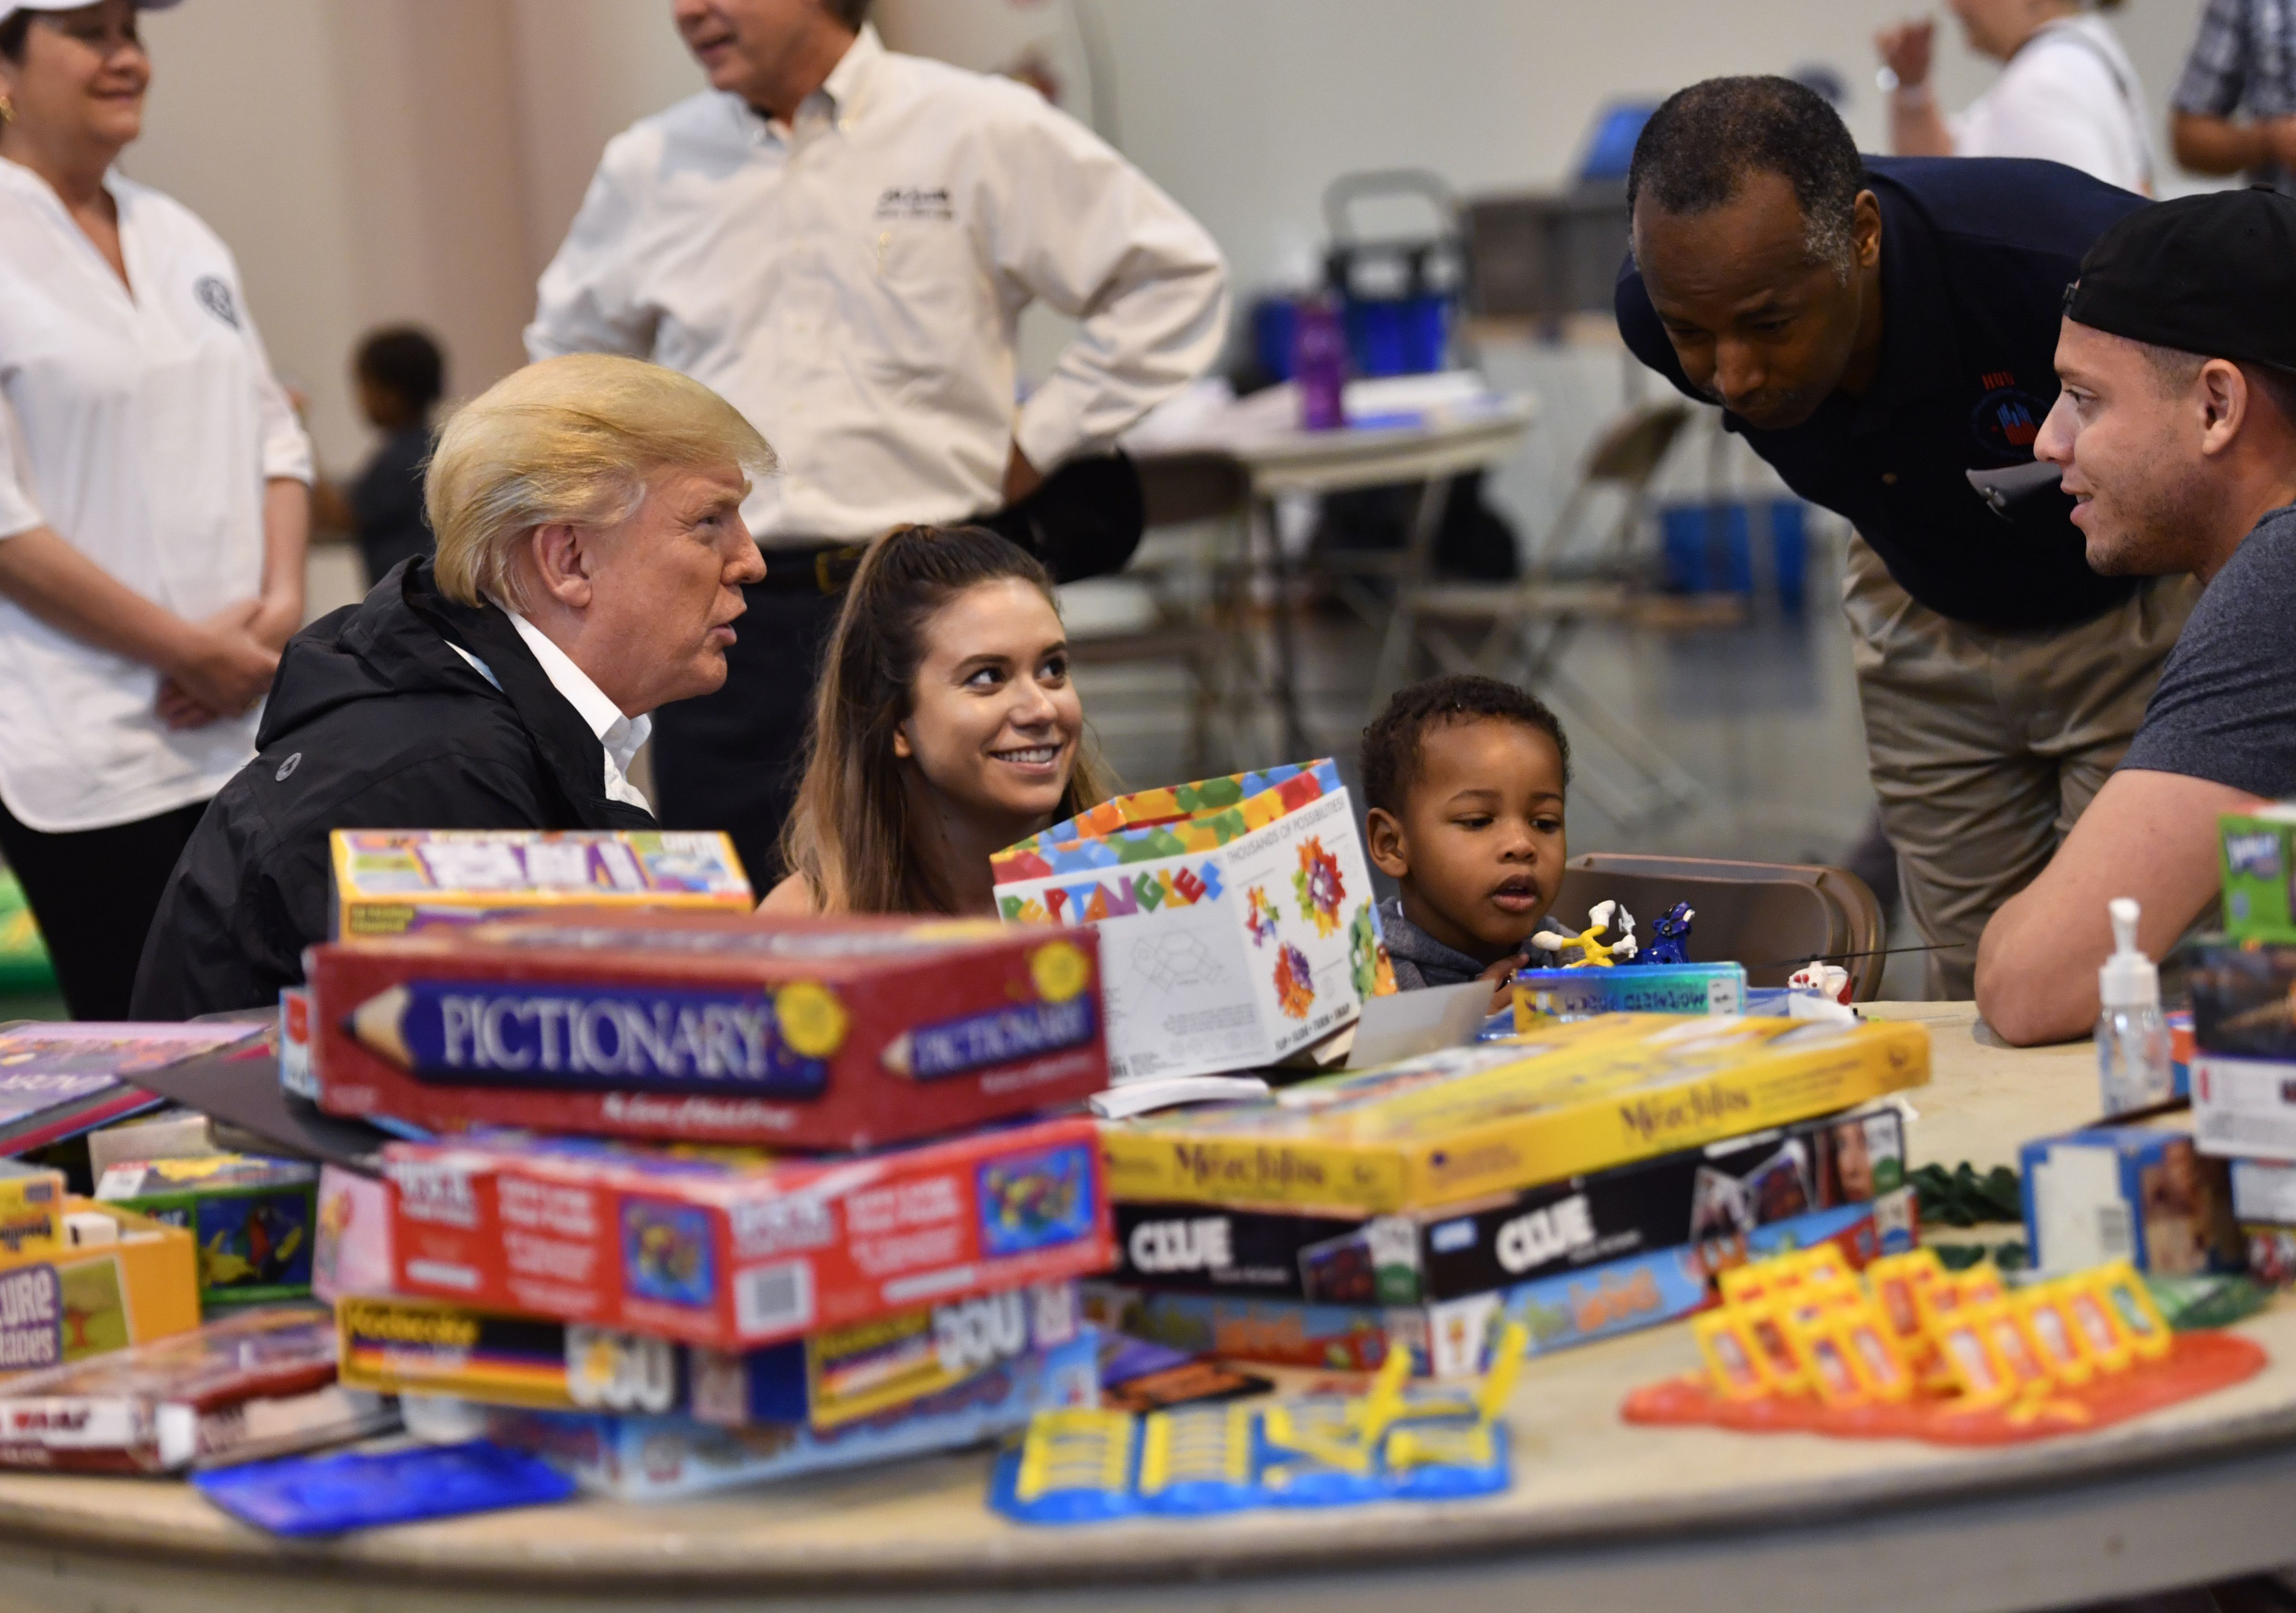 US President Donald Trump, with Secretary of Housing and Urban Development Ben Carson (2nd R), visits Hurricane Harvey victims at NRG Center in Houston on September 2, 2017. US President Donald Trump, with visits Hurricane Harvey victims at NRG Center in Houston on September 2, 2017. NICHOLAS KAMM/AFP/Getty Images